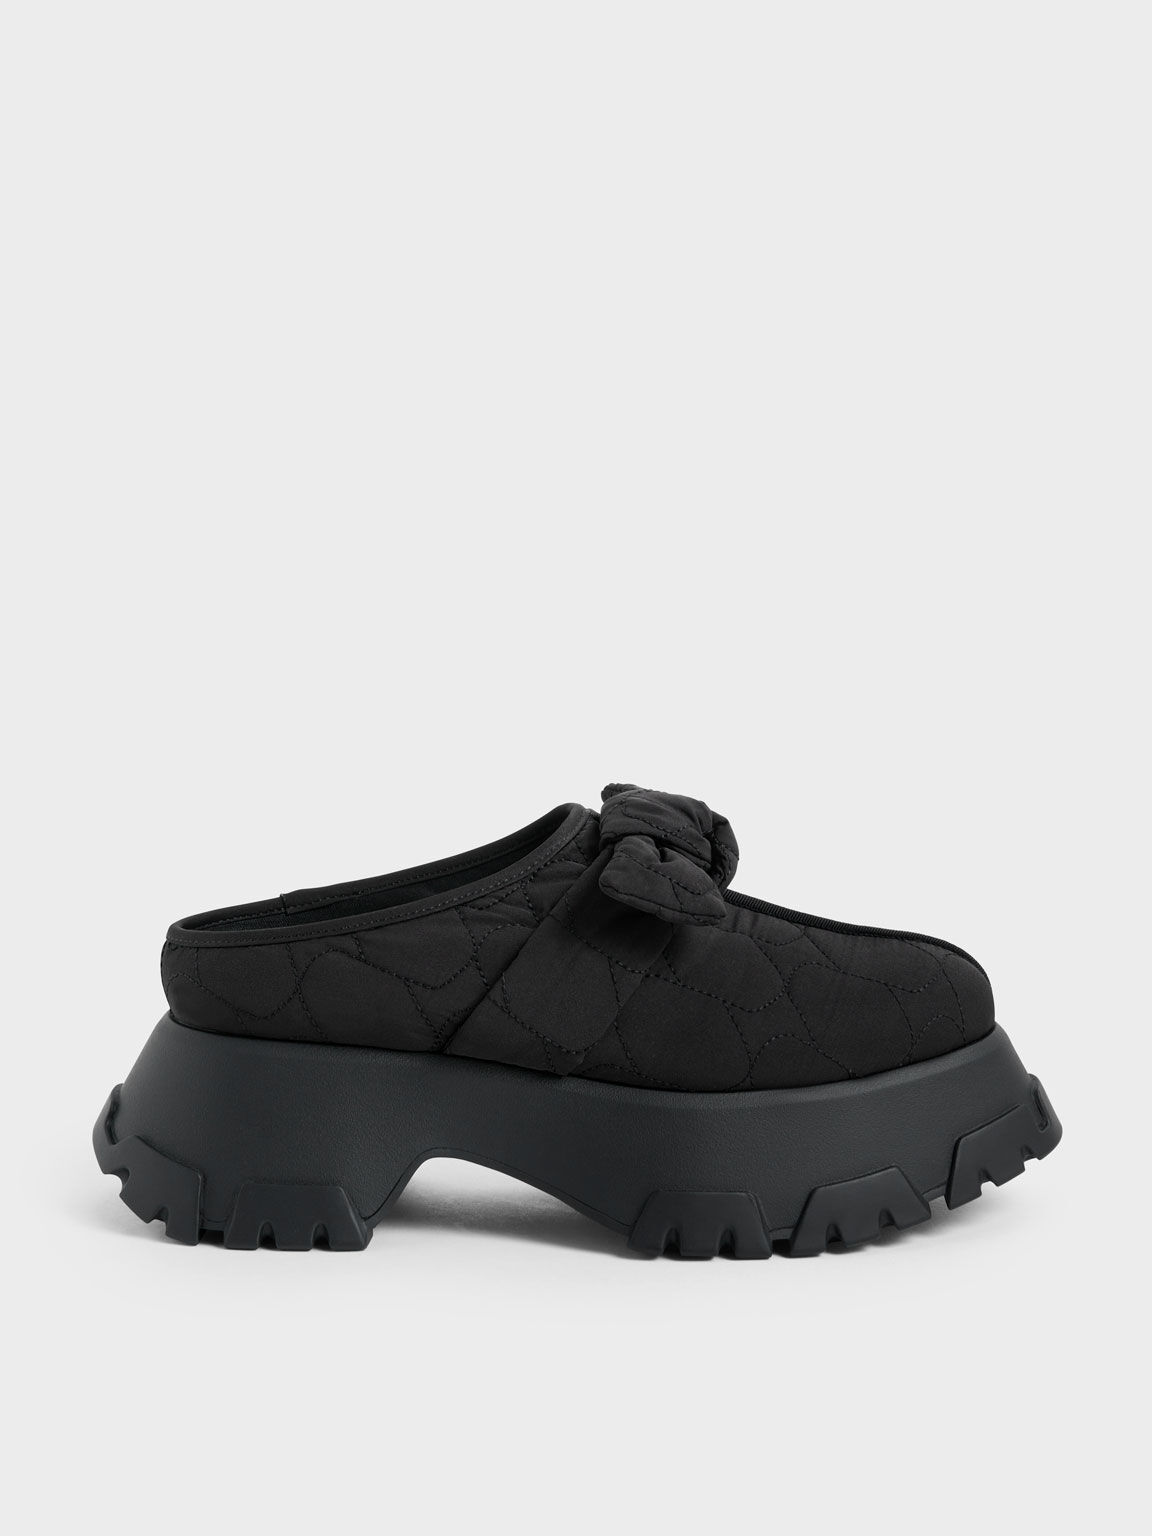 Black Recycled Polyester Knotted Platform Mules - CHARLES & KEITH KH